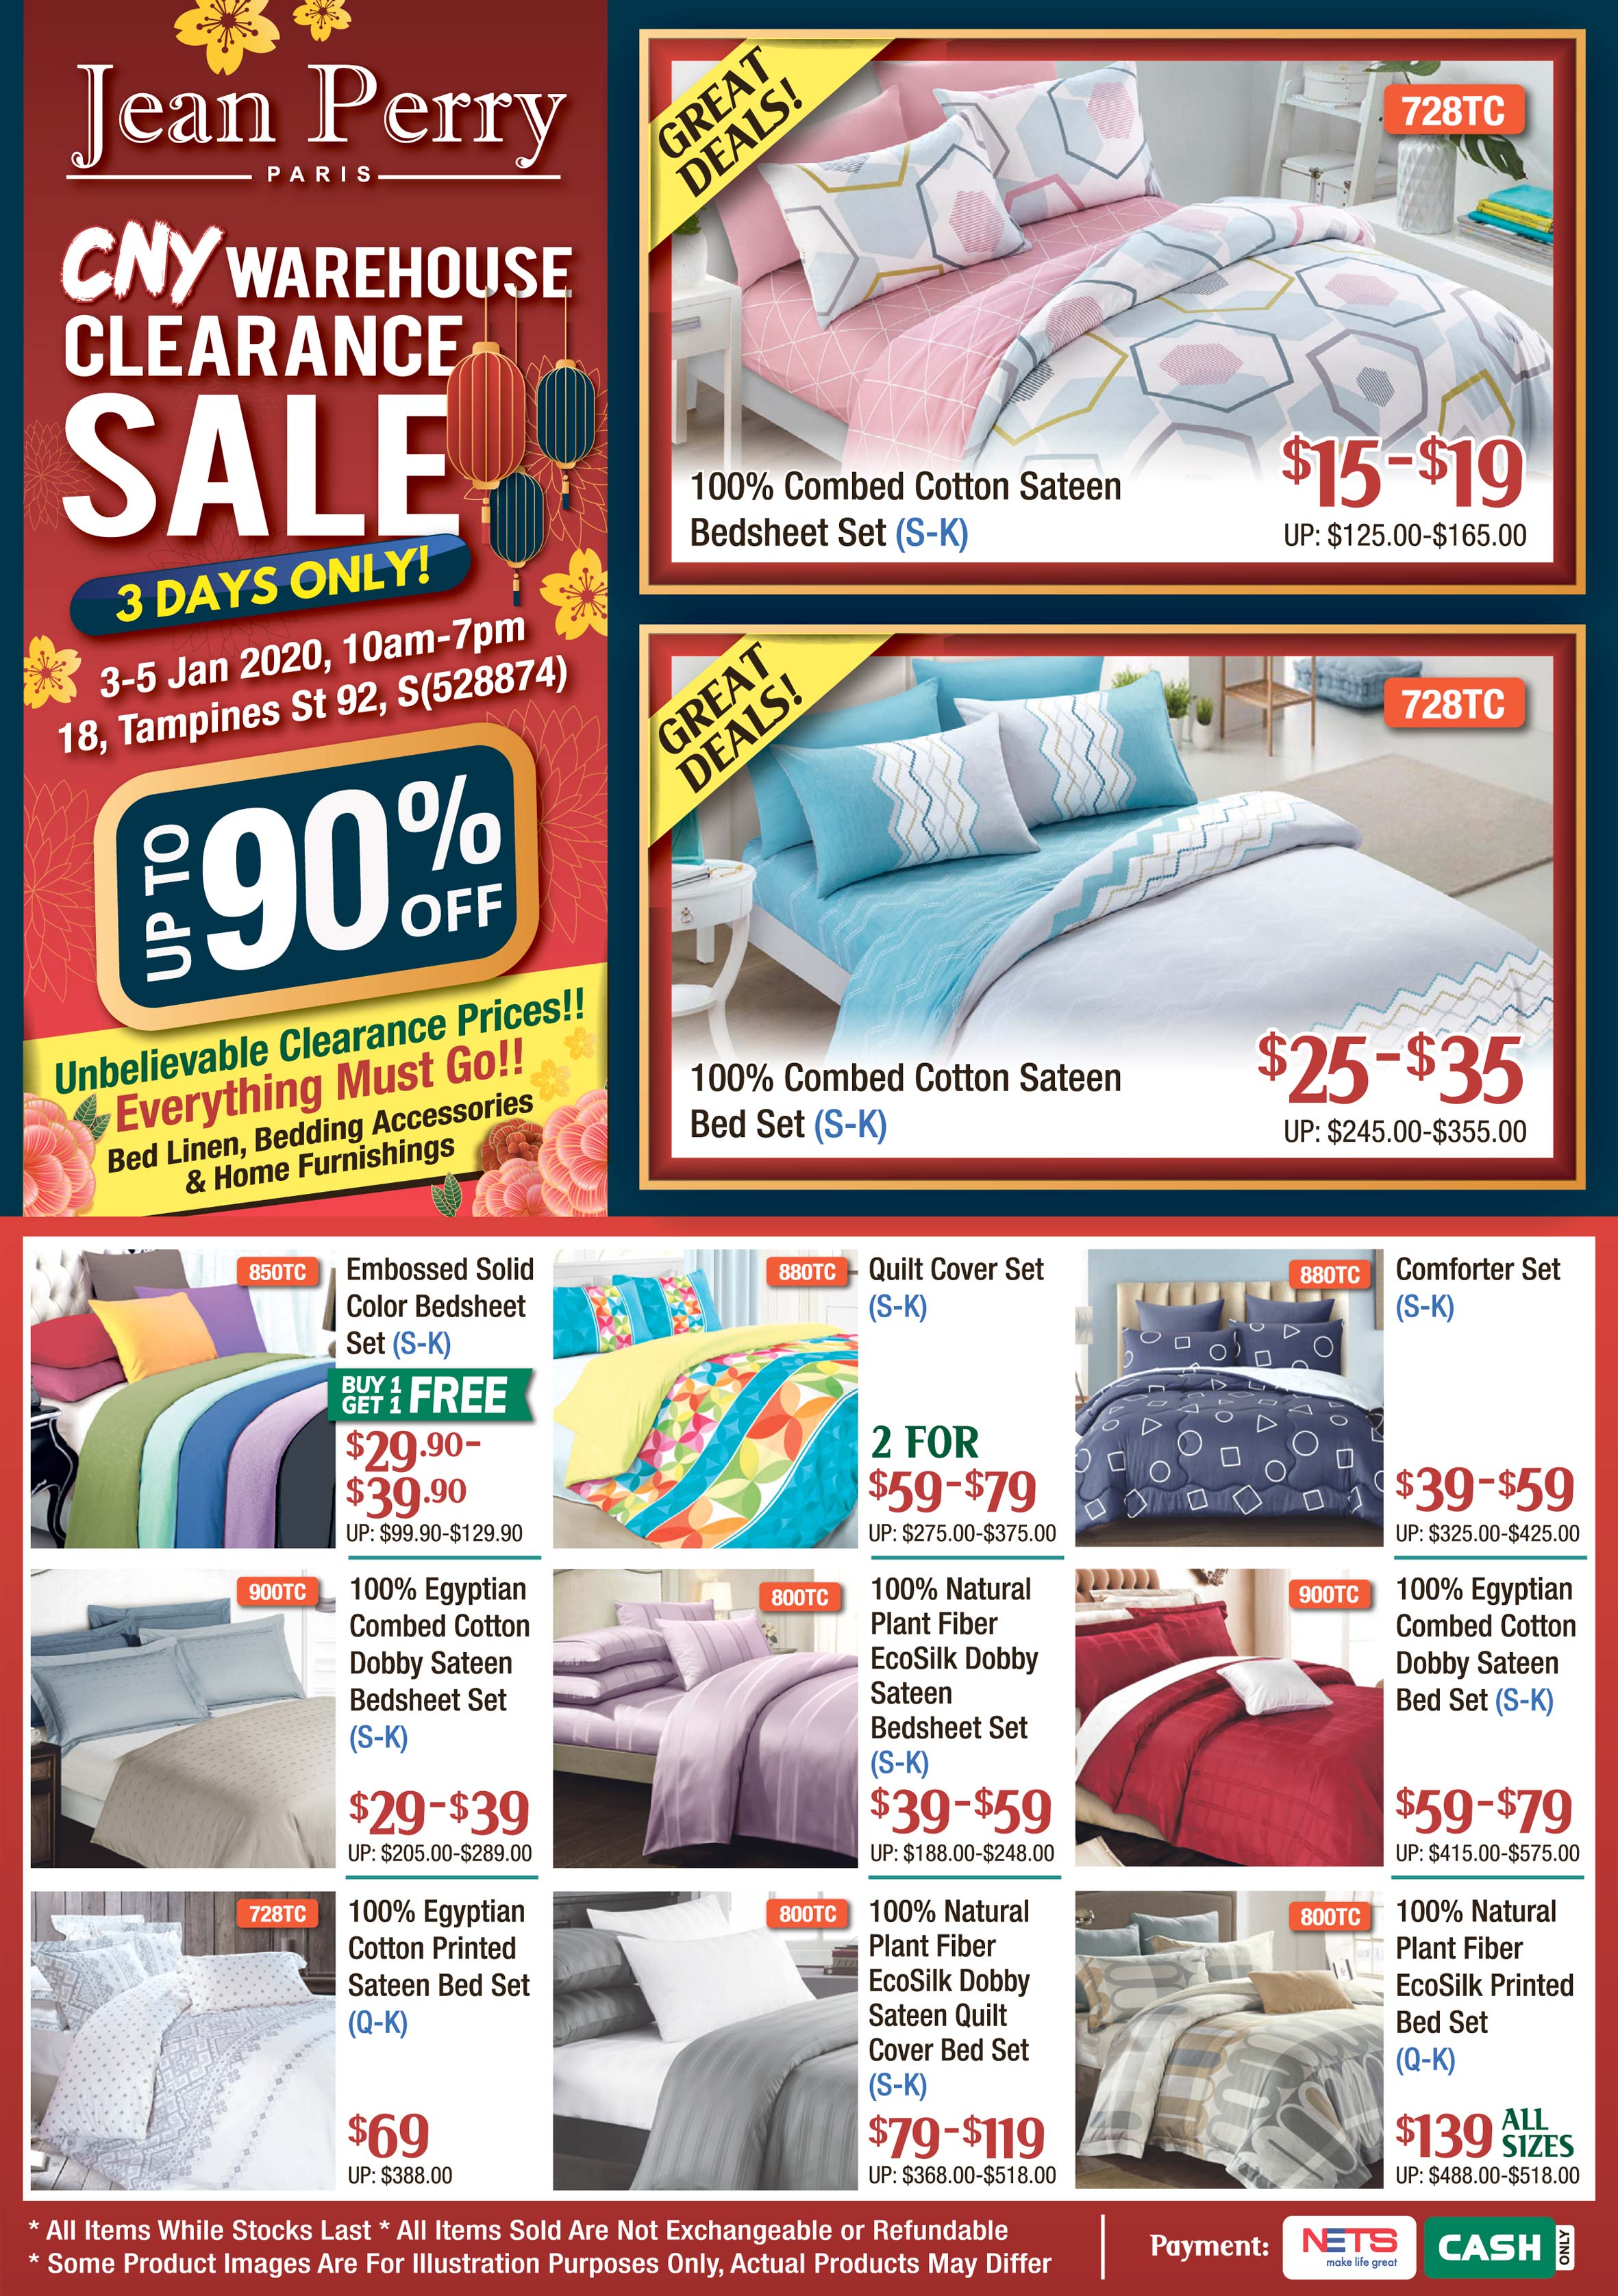 Warehouse clearance sale (up to 90% off) for bedsheets, comforters & other home furnishings at Tampines from 3 – 5 Jan 2020 - 1